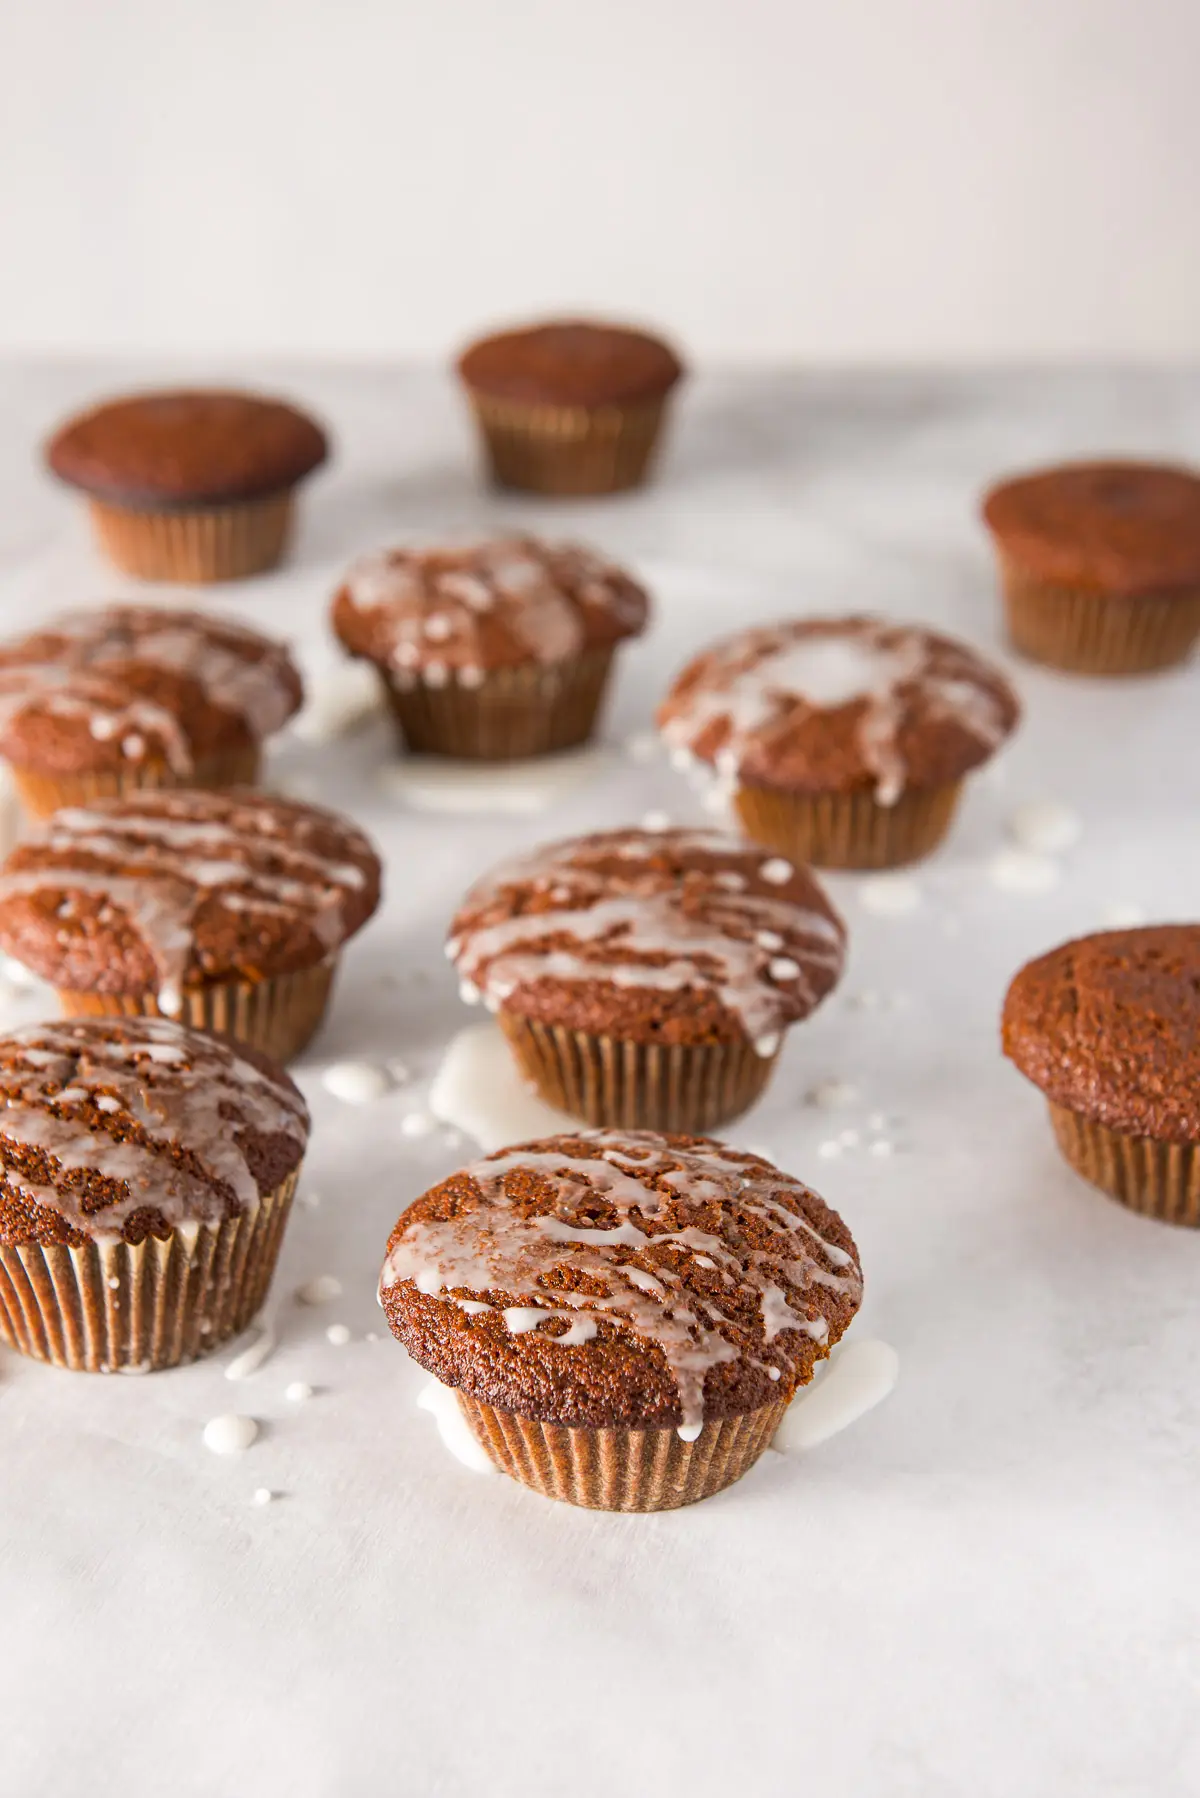 Glazed muffins on parchment paper